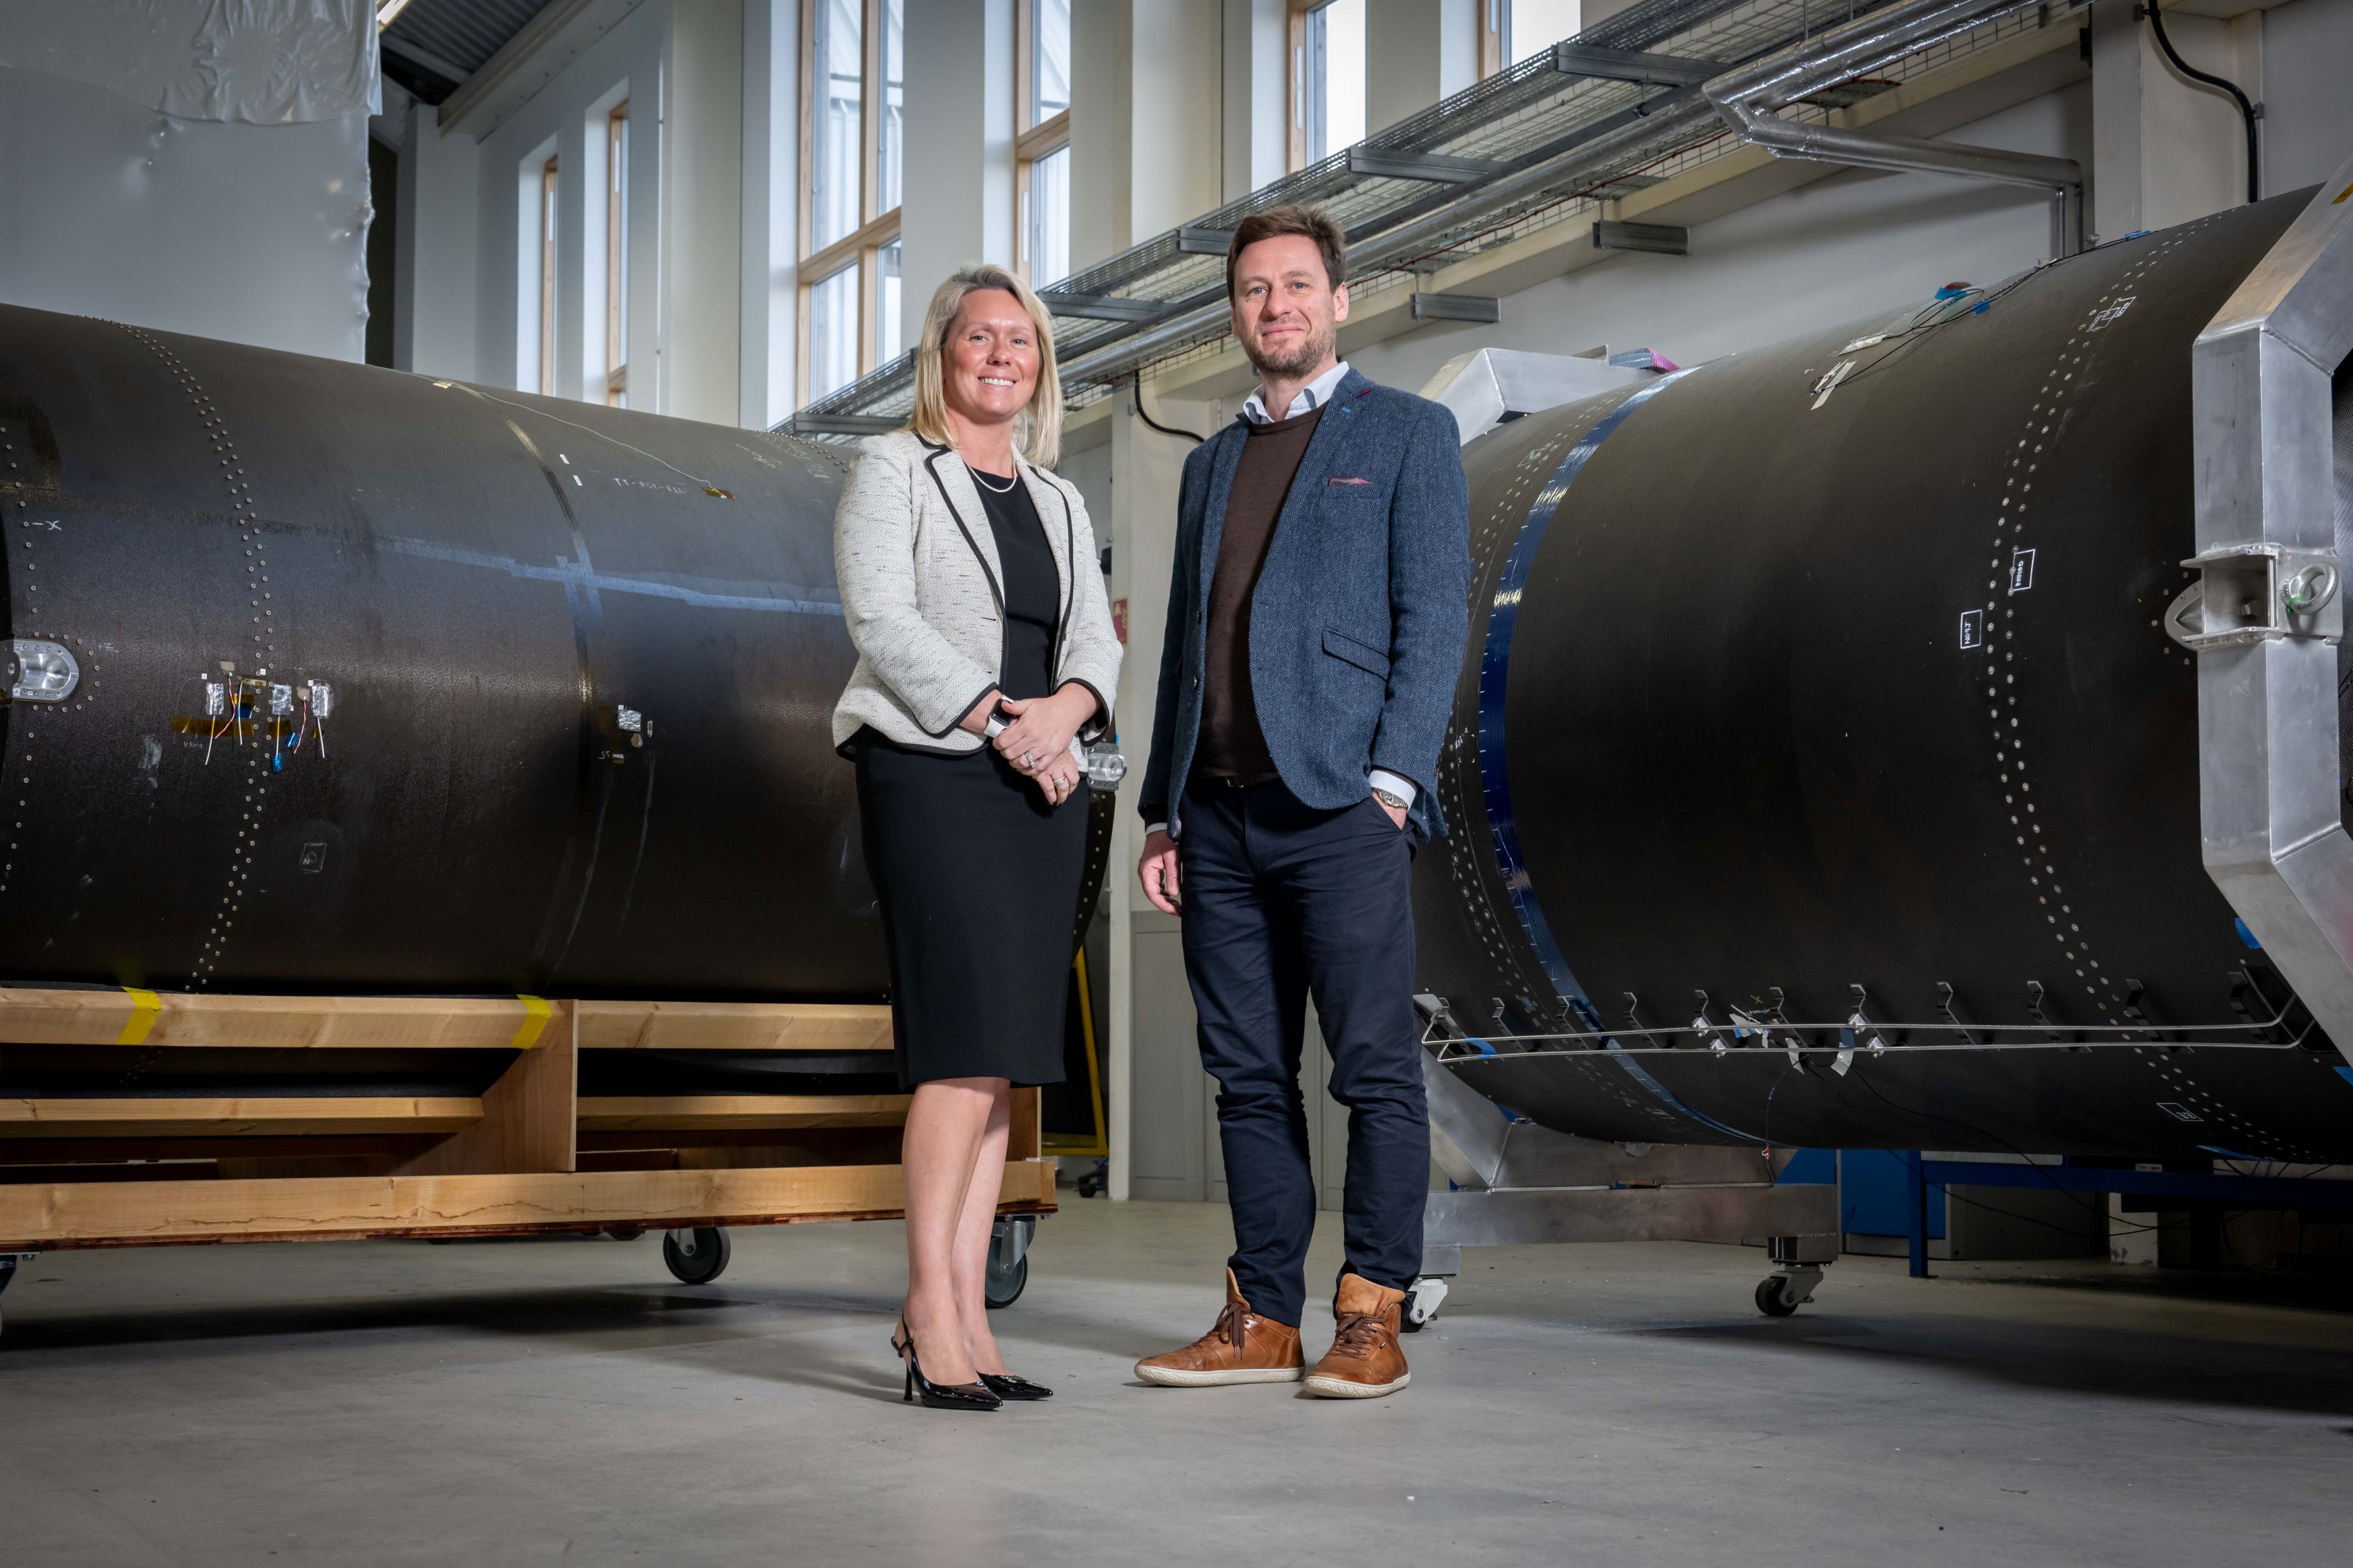 Orbex rockets ahead with £16.7 million investment boost